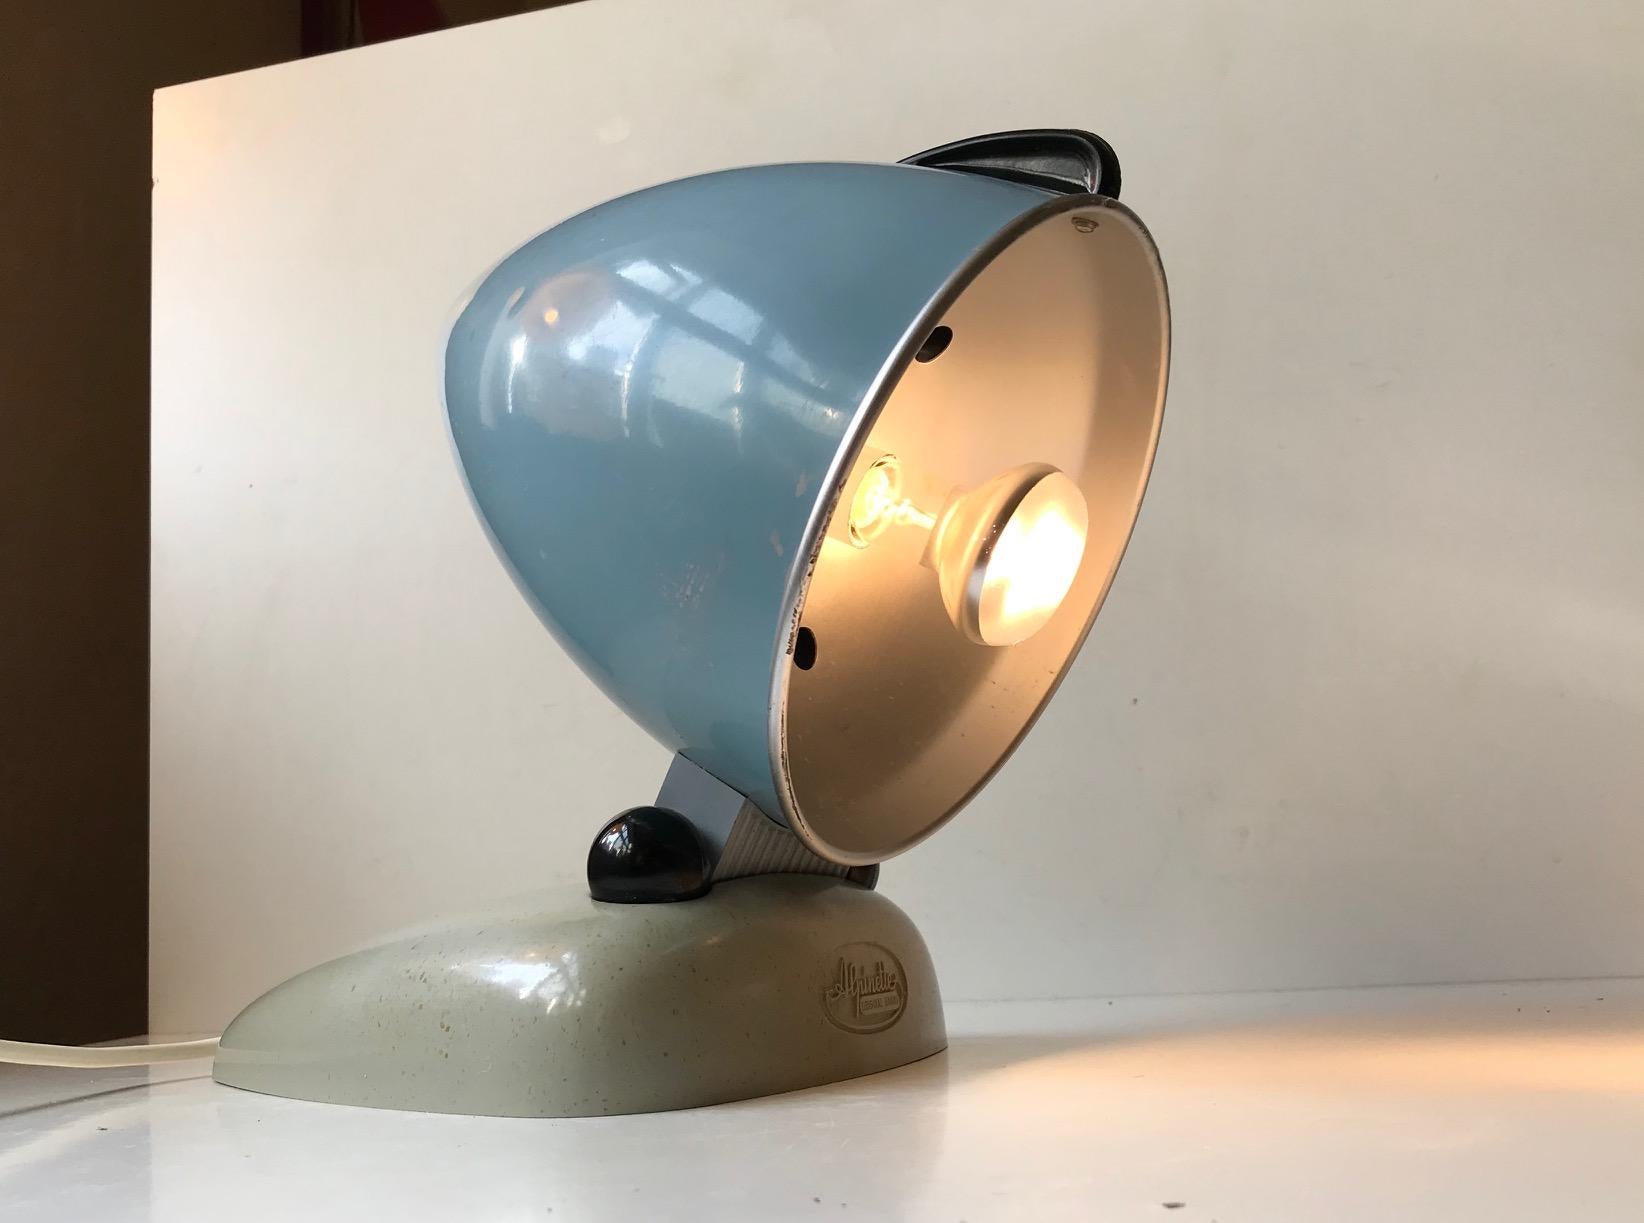 The Hanau Alpinette lamp was originally intended for light therapy. It dates back to the 1950s and has a wonderful Bullit - streamline design. This style was popularized by people like Raymond Loewy and Norman Bel Geddes. It has been fully rewired